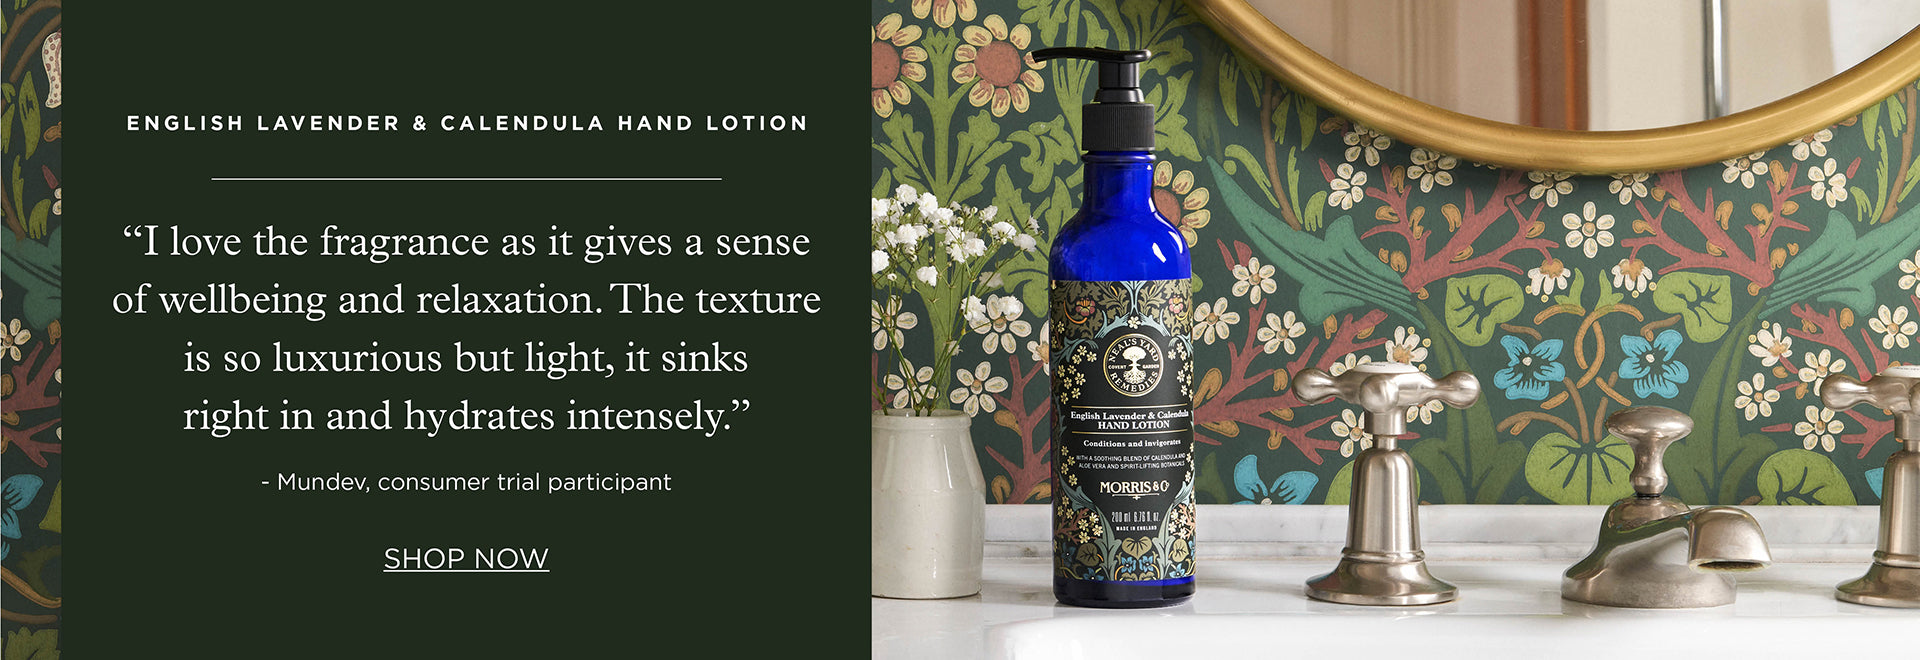 Morris and Co English Organic Lavender and Calendula Hand Lotion by Neal's Yard Remedies